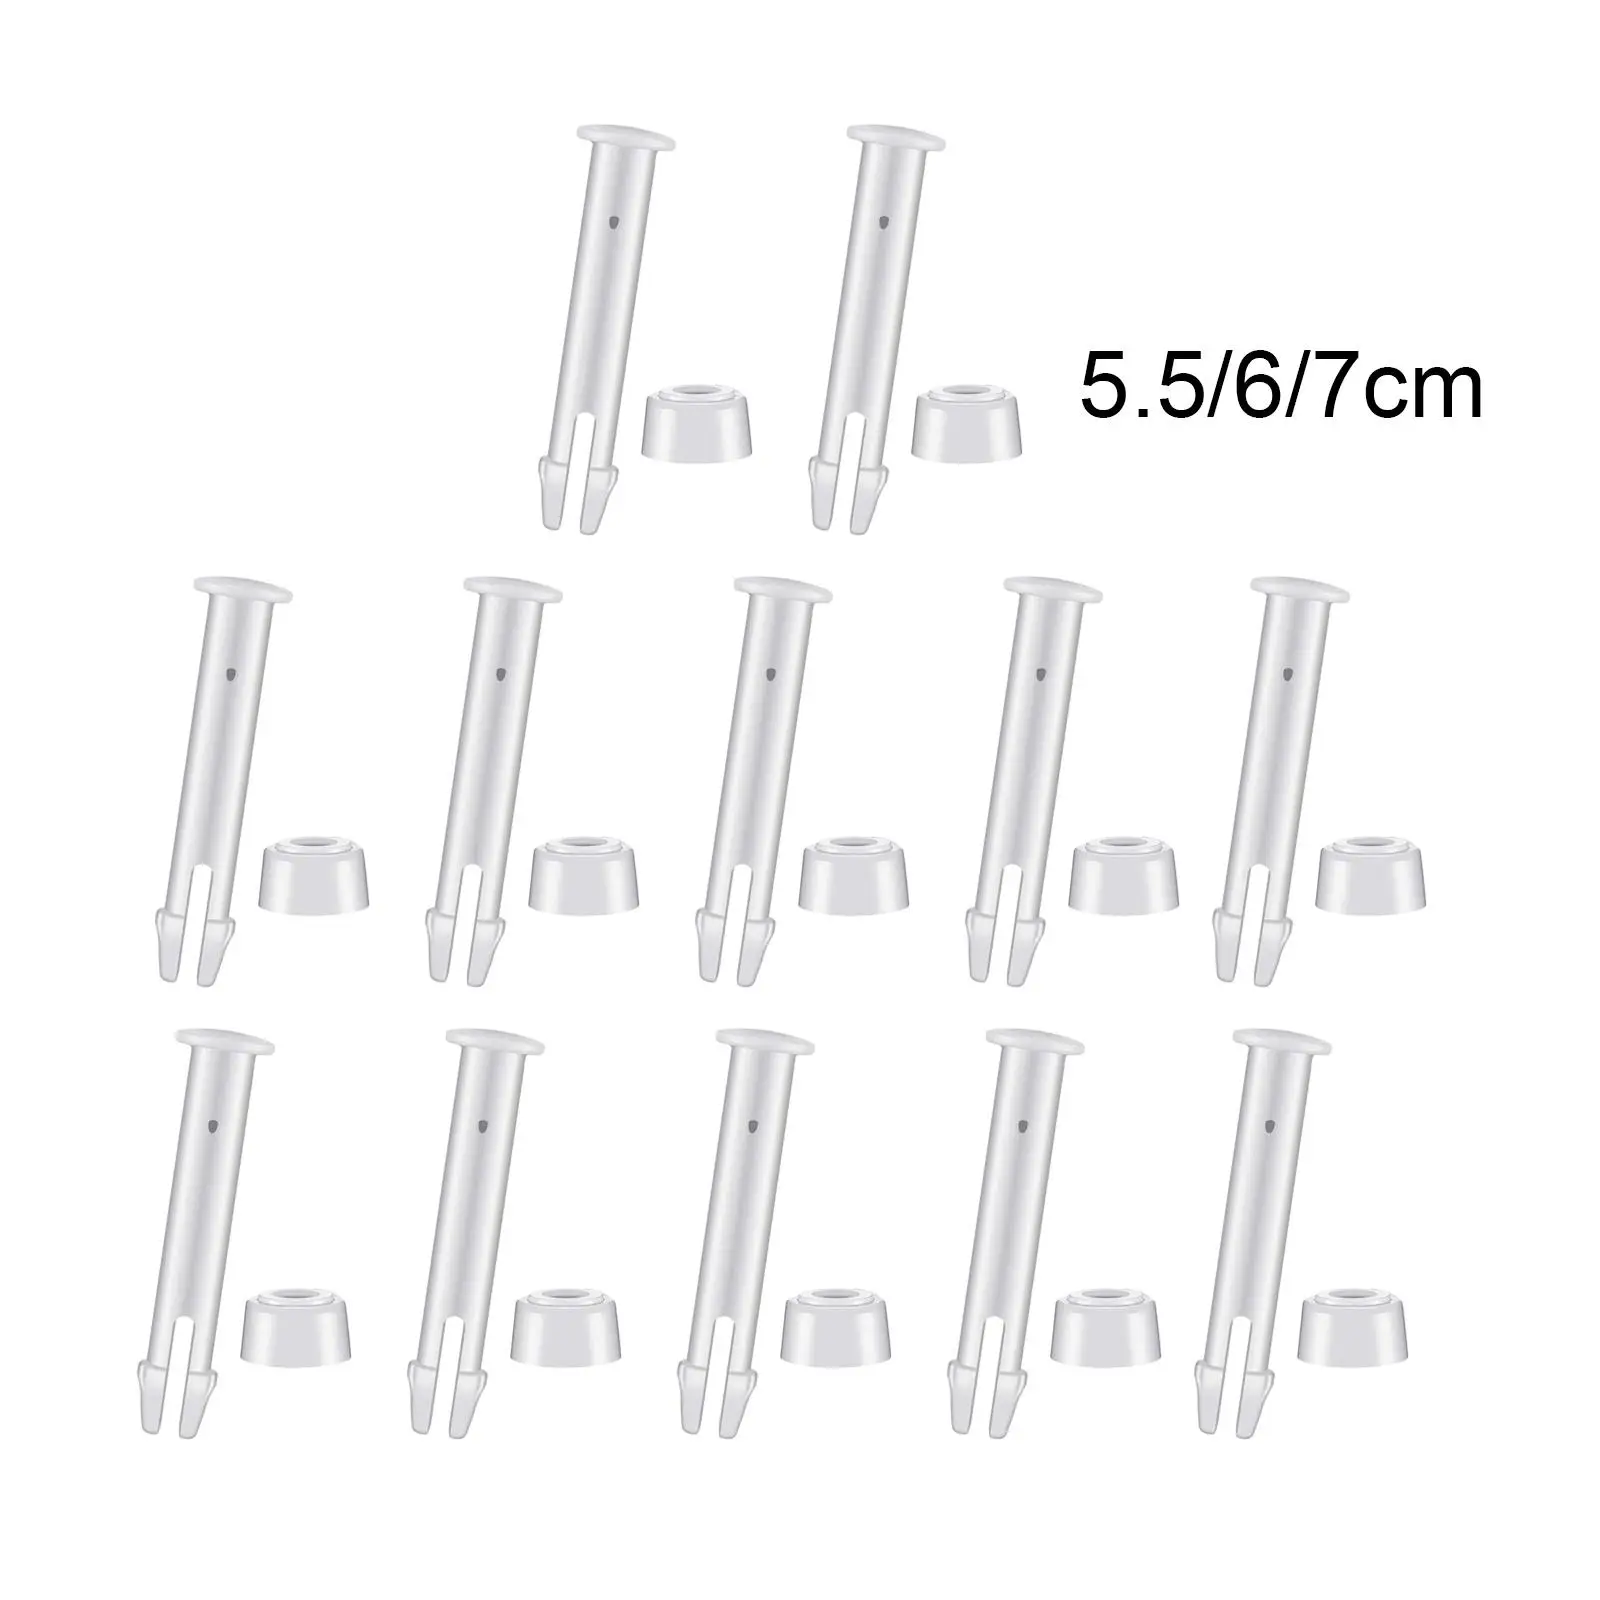 12 Pieces ABS Plastic Pool Joint Pins & Rubber Seals Swimming Pool Replacement Parts